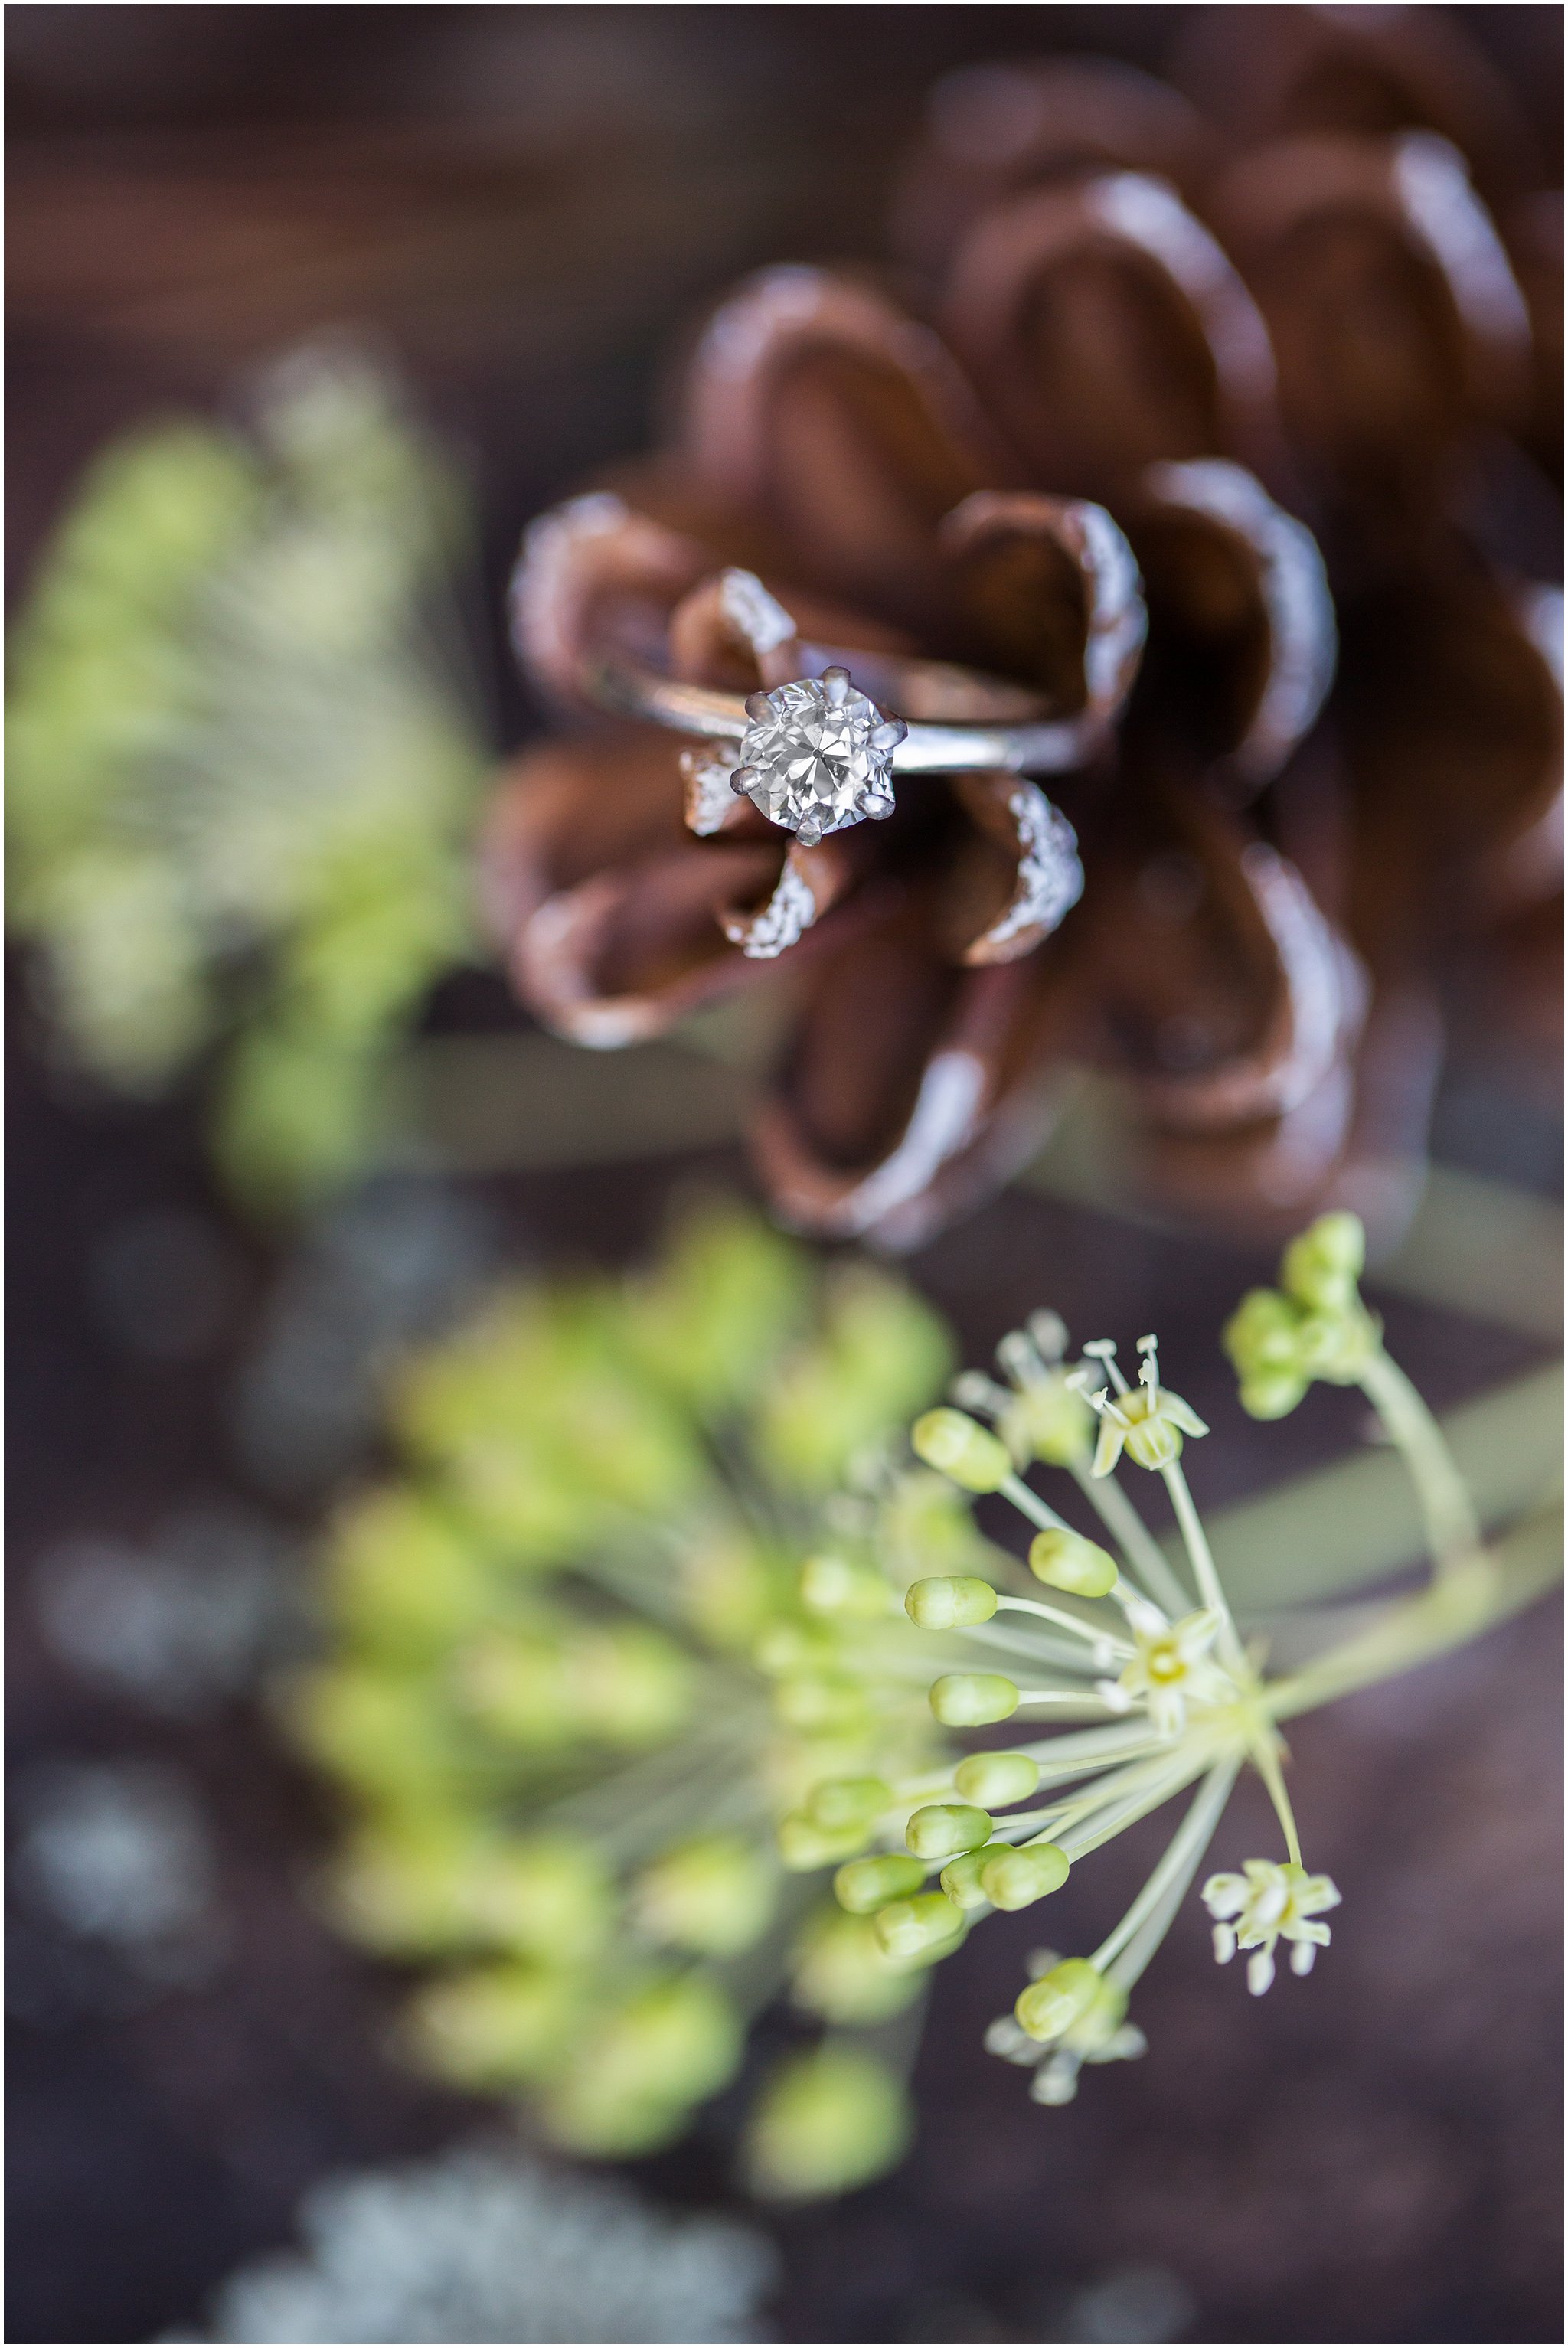 Engagement ring with pinecone and Queen Anne's Lace